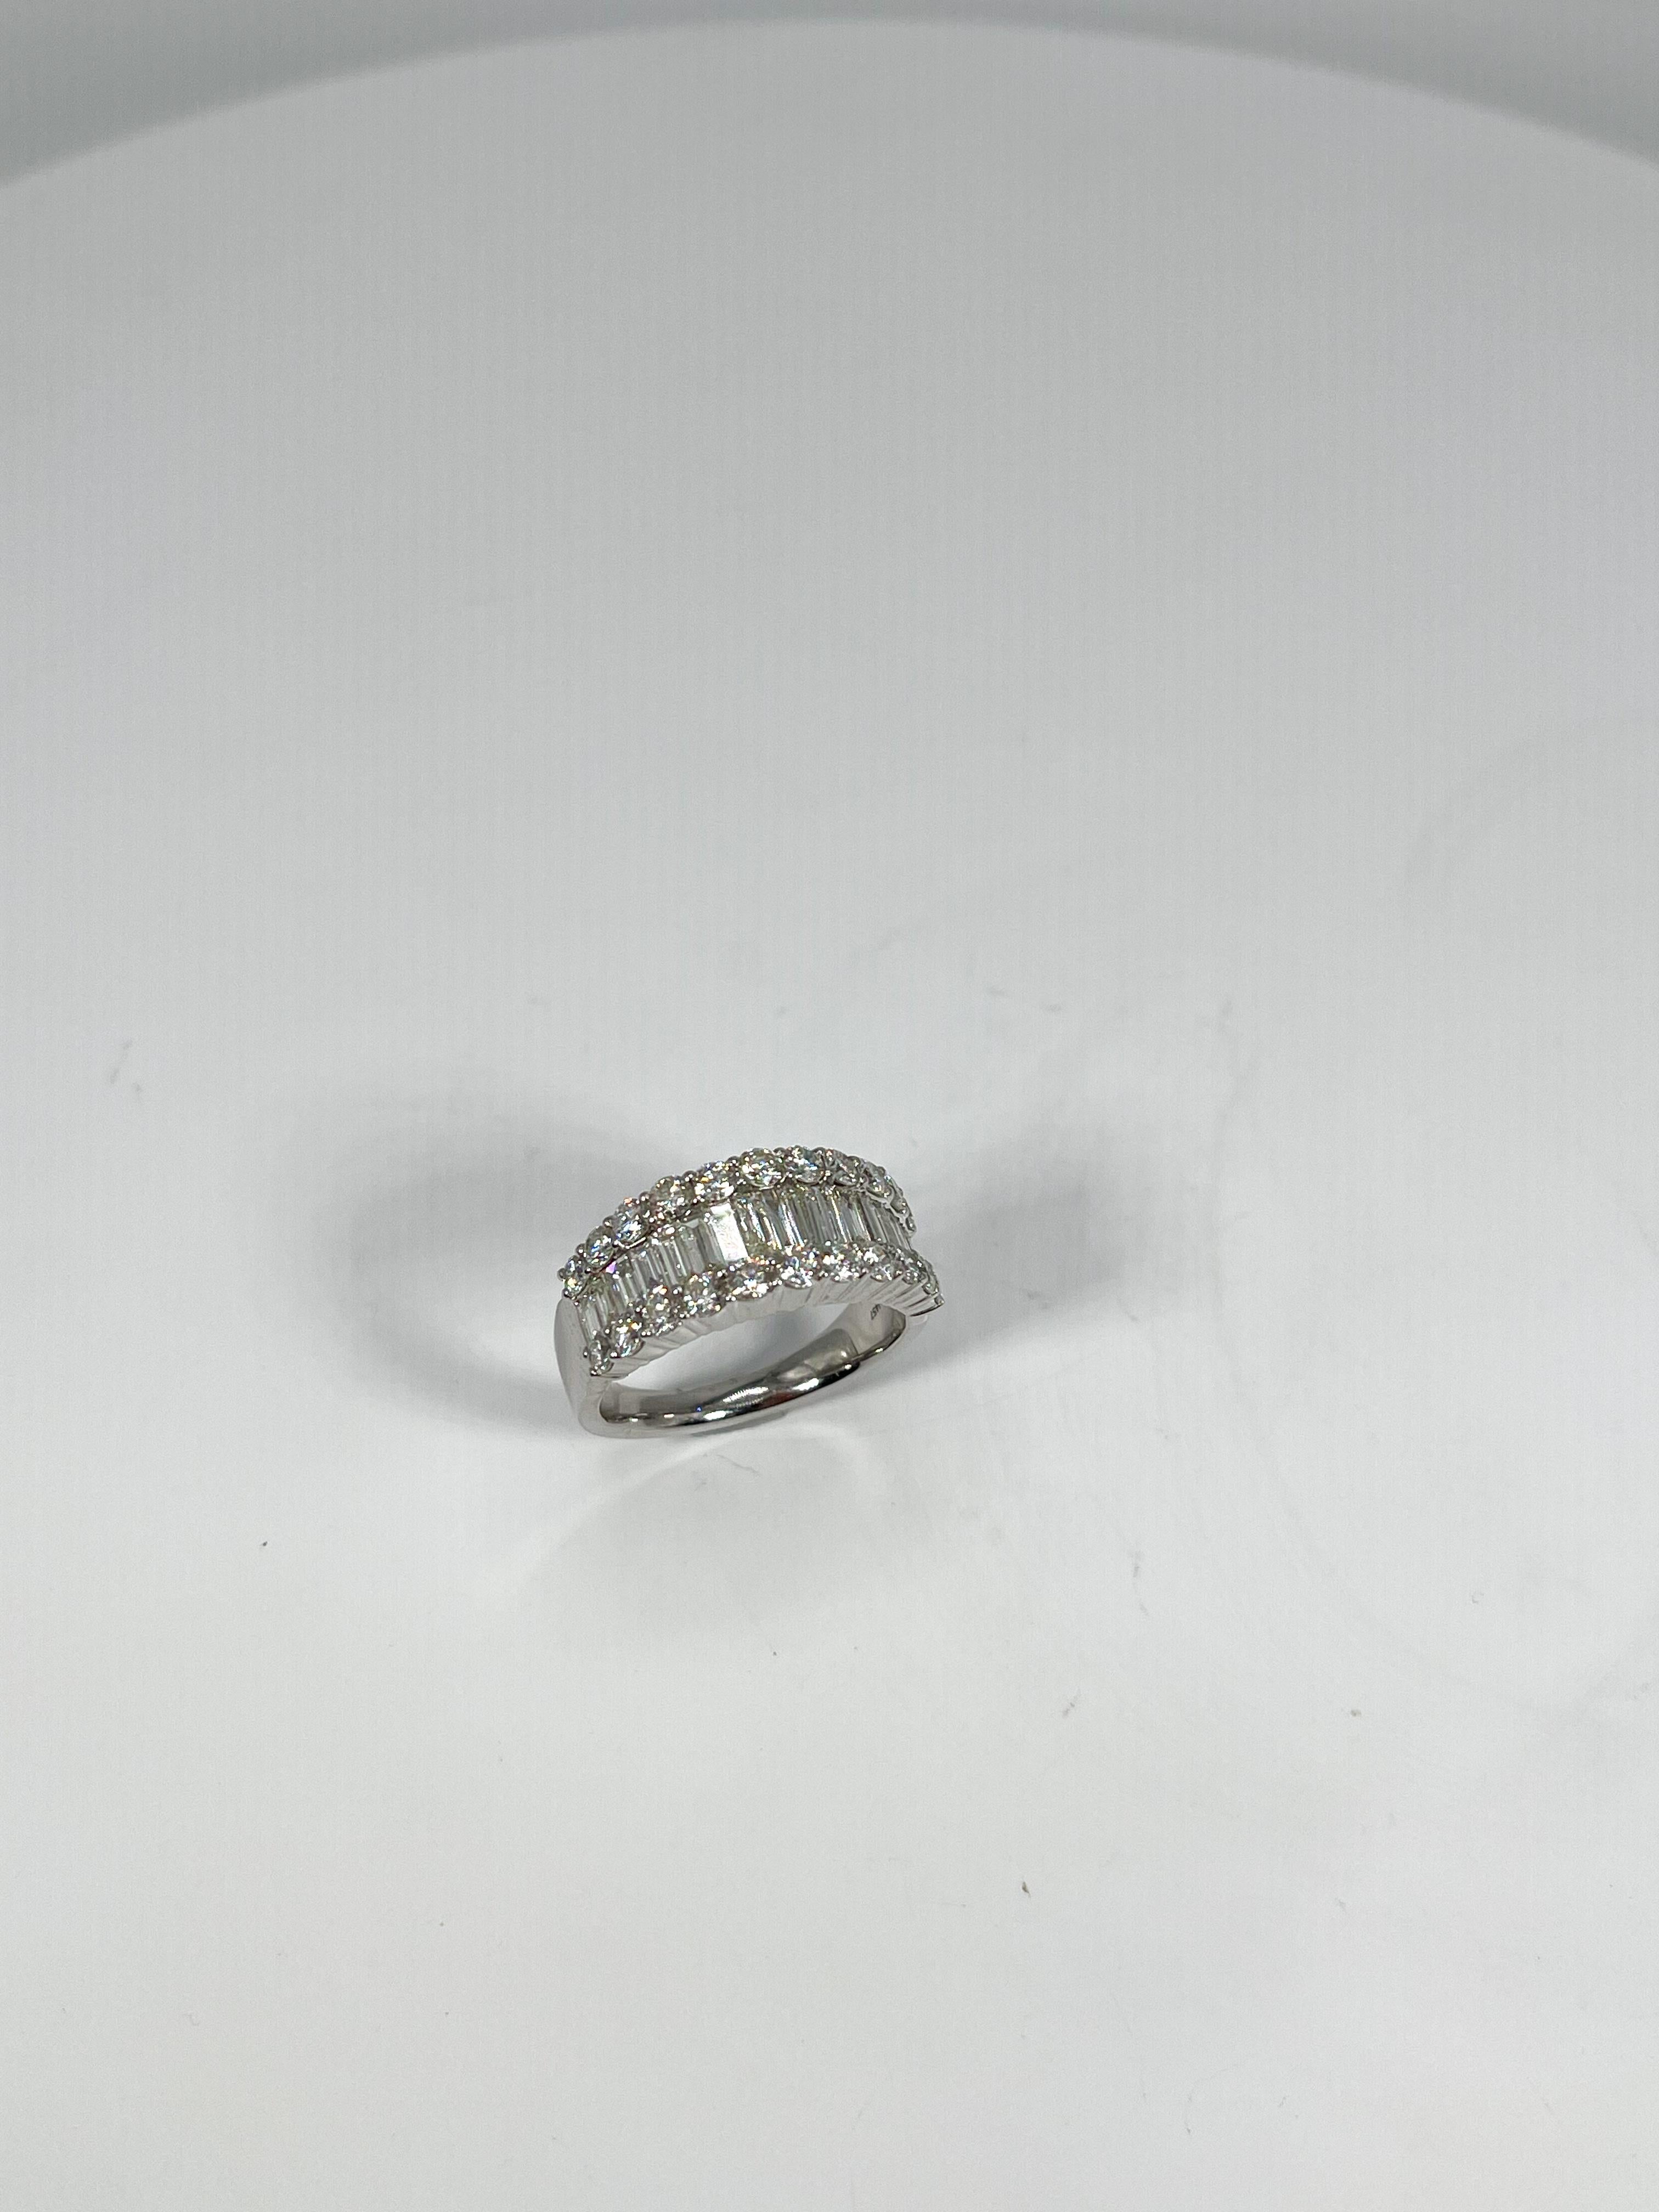 14k white gold 1.15 CTW baguette and .90 CTW round diamond band. The Band has baguettes in the center, and round diamonds going along the top. The Width of the ring is 8.6 mm, has a weight of 6.86, and the size of the ring is a 7. 